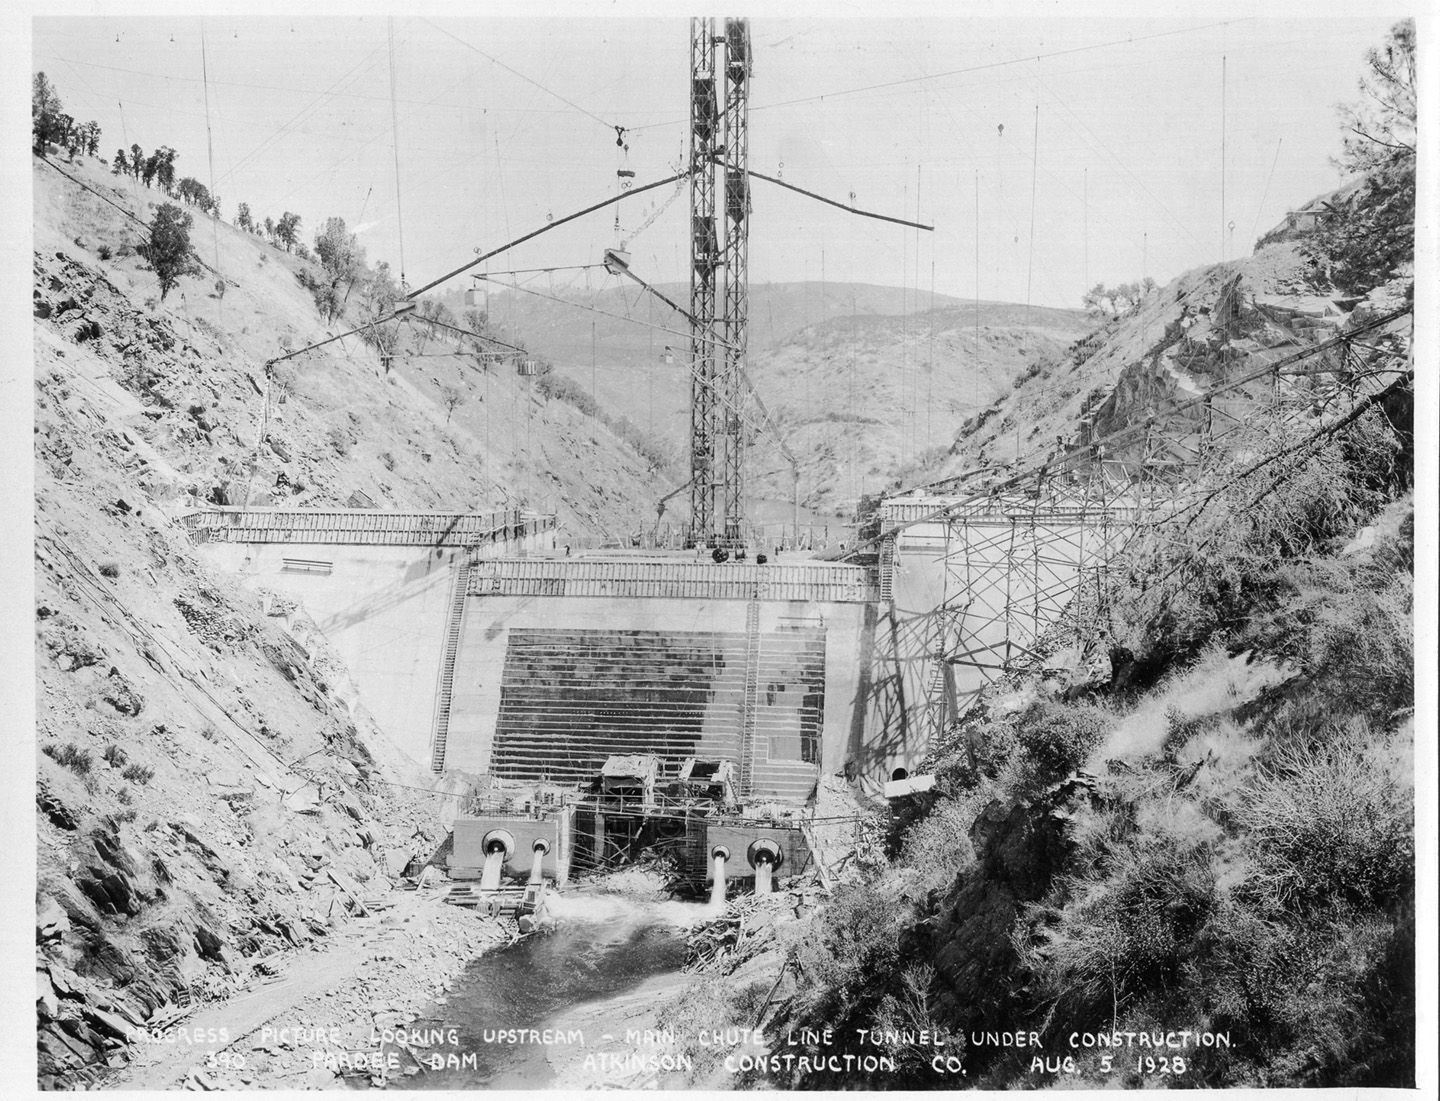 Progress picture looking upstream - main chute line tunnel under construction. (1928)	